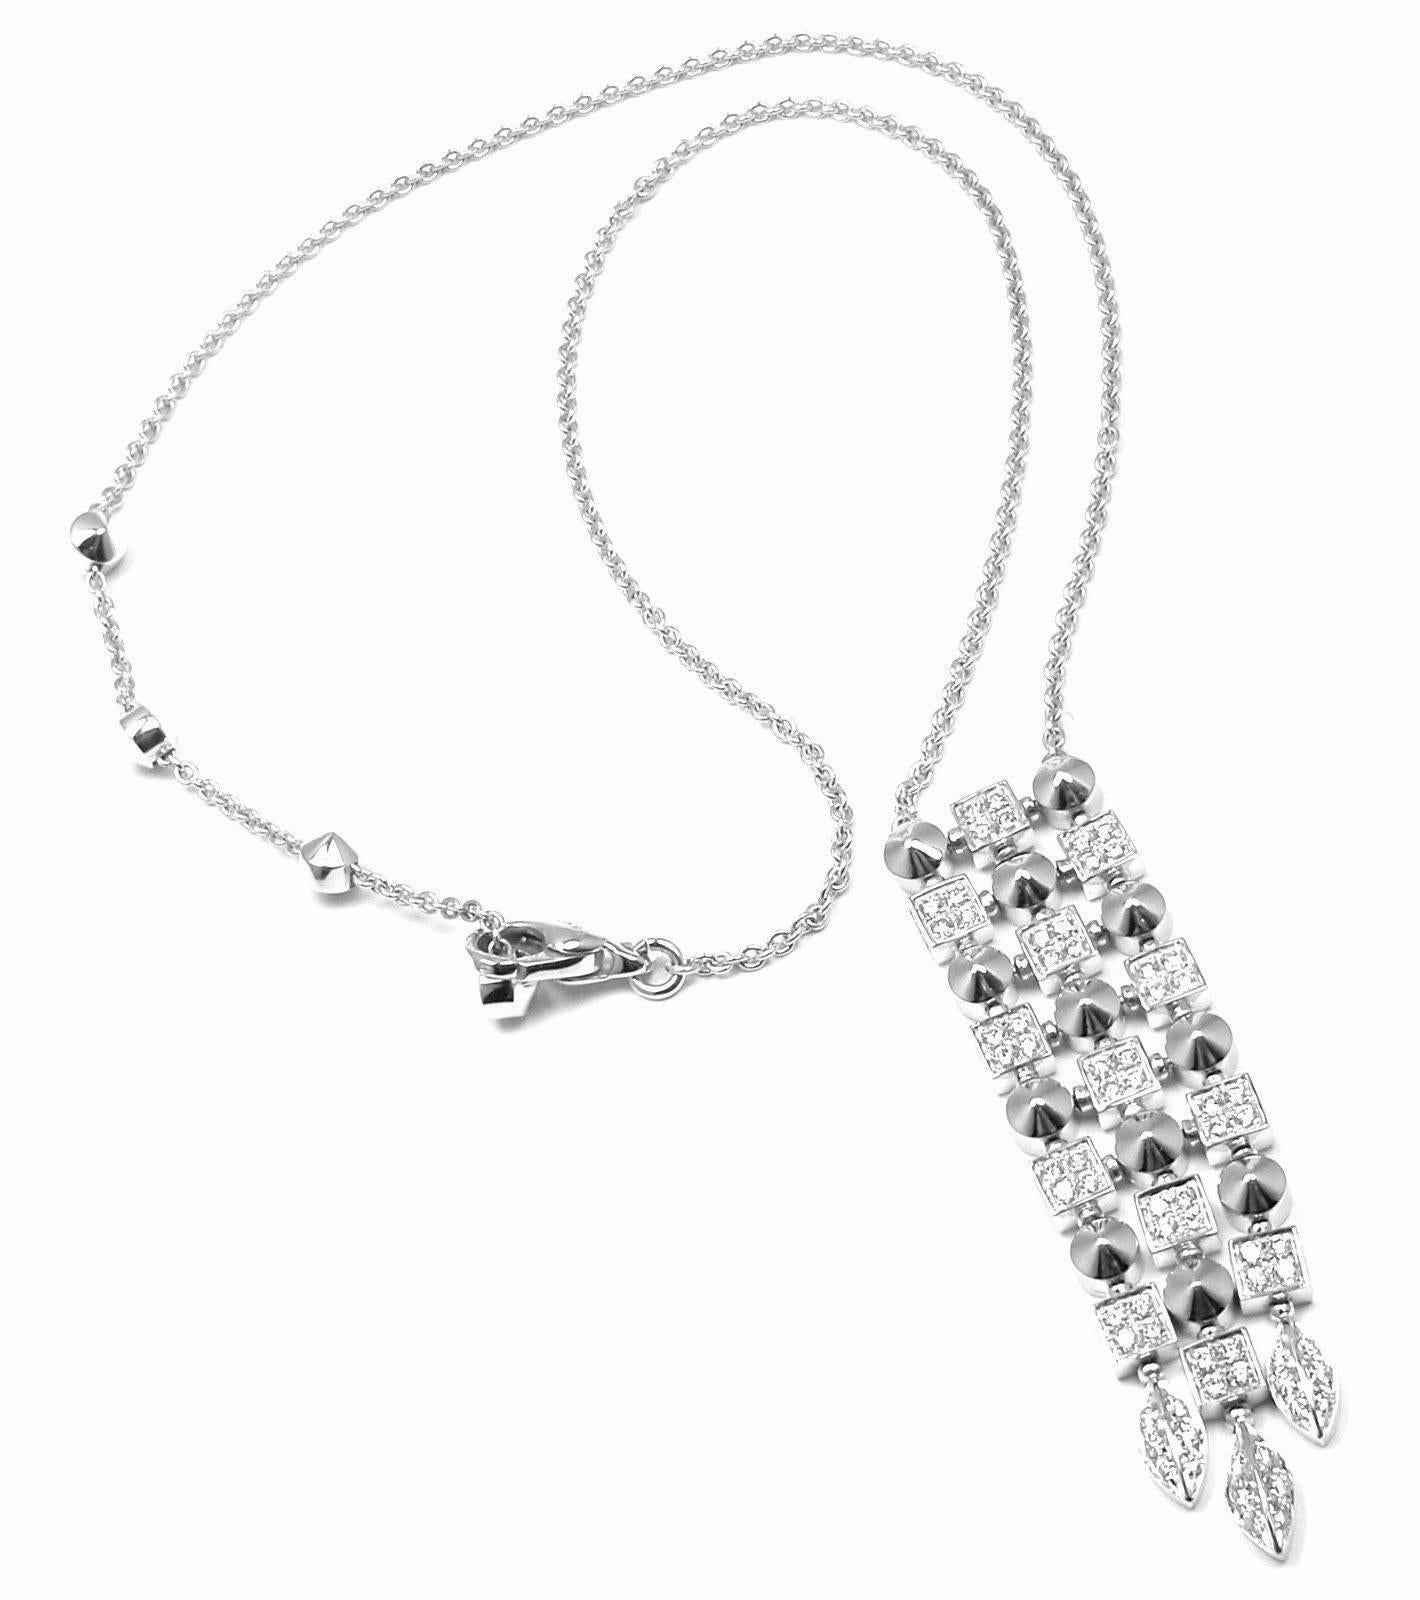 18k White Gold Diamond Lucea Pendant Necklace by Bulgari. 
With 70 round cut diamonds 
total weight approx 1.40ct VS1 clarity, G color 
This necklace comes with original Bulgari box.

Details:
Measurements:
Chain: 17